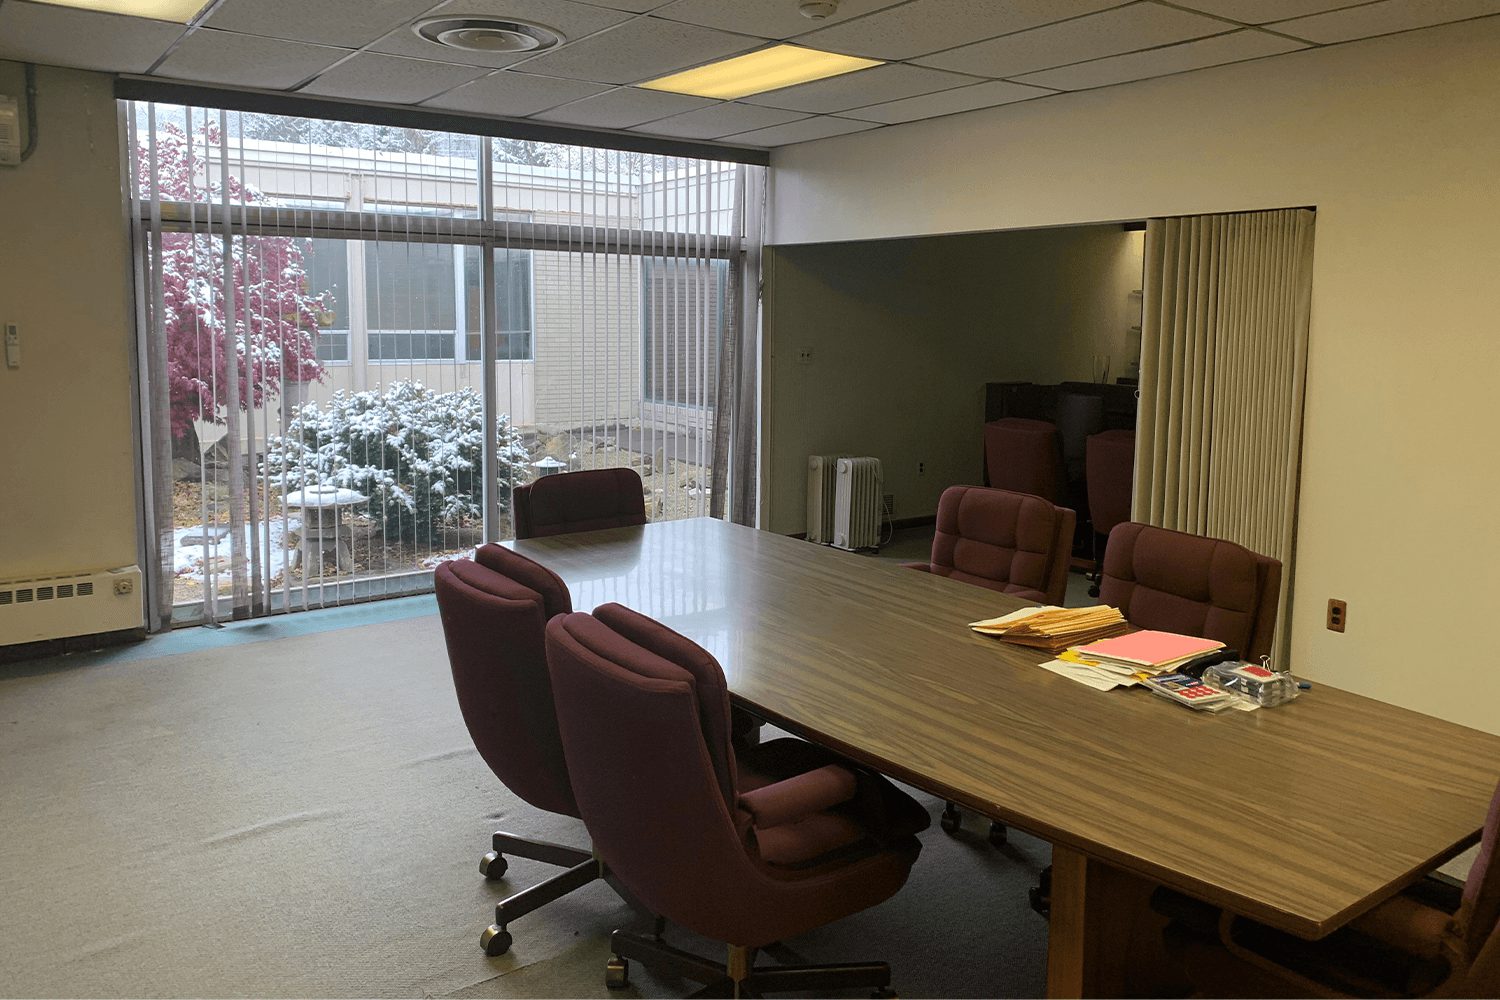 Conference room with a table and chairs and floor-to-ceiling windows